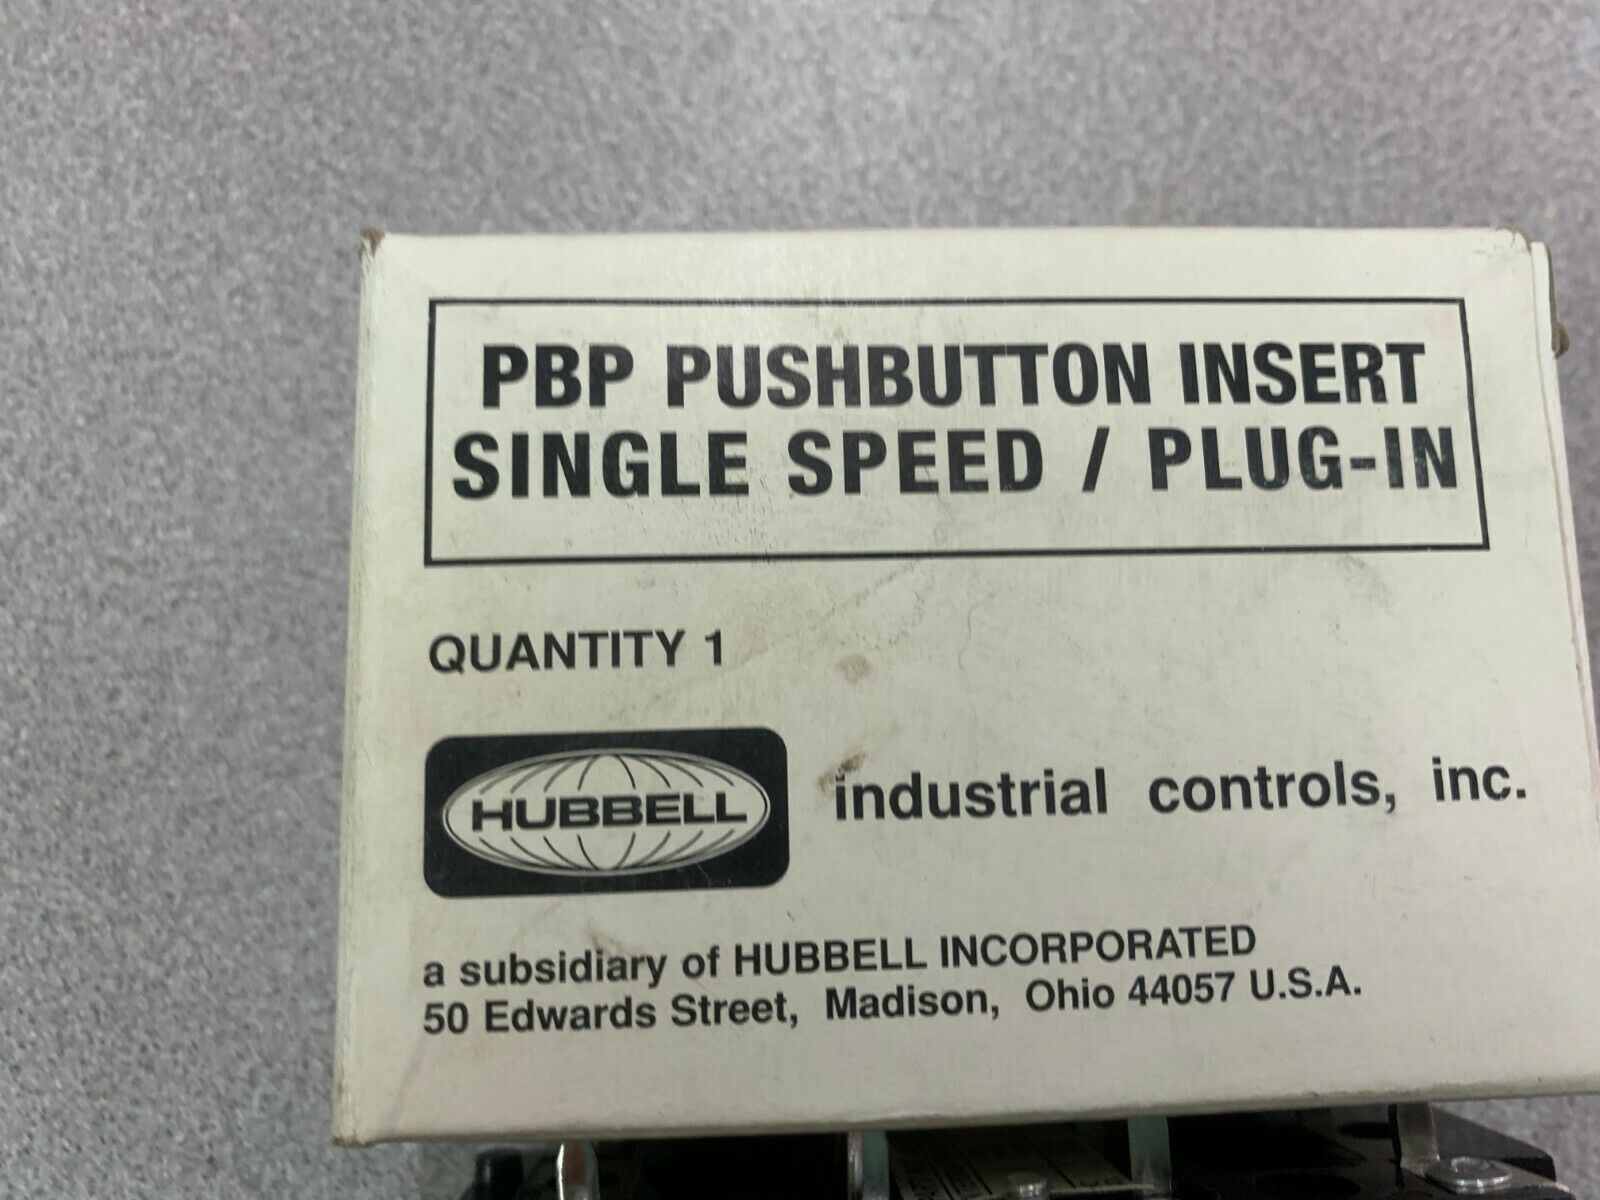 NEW IN BOX HUBBELL PBP PUSHBUTTON INSERT PG3